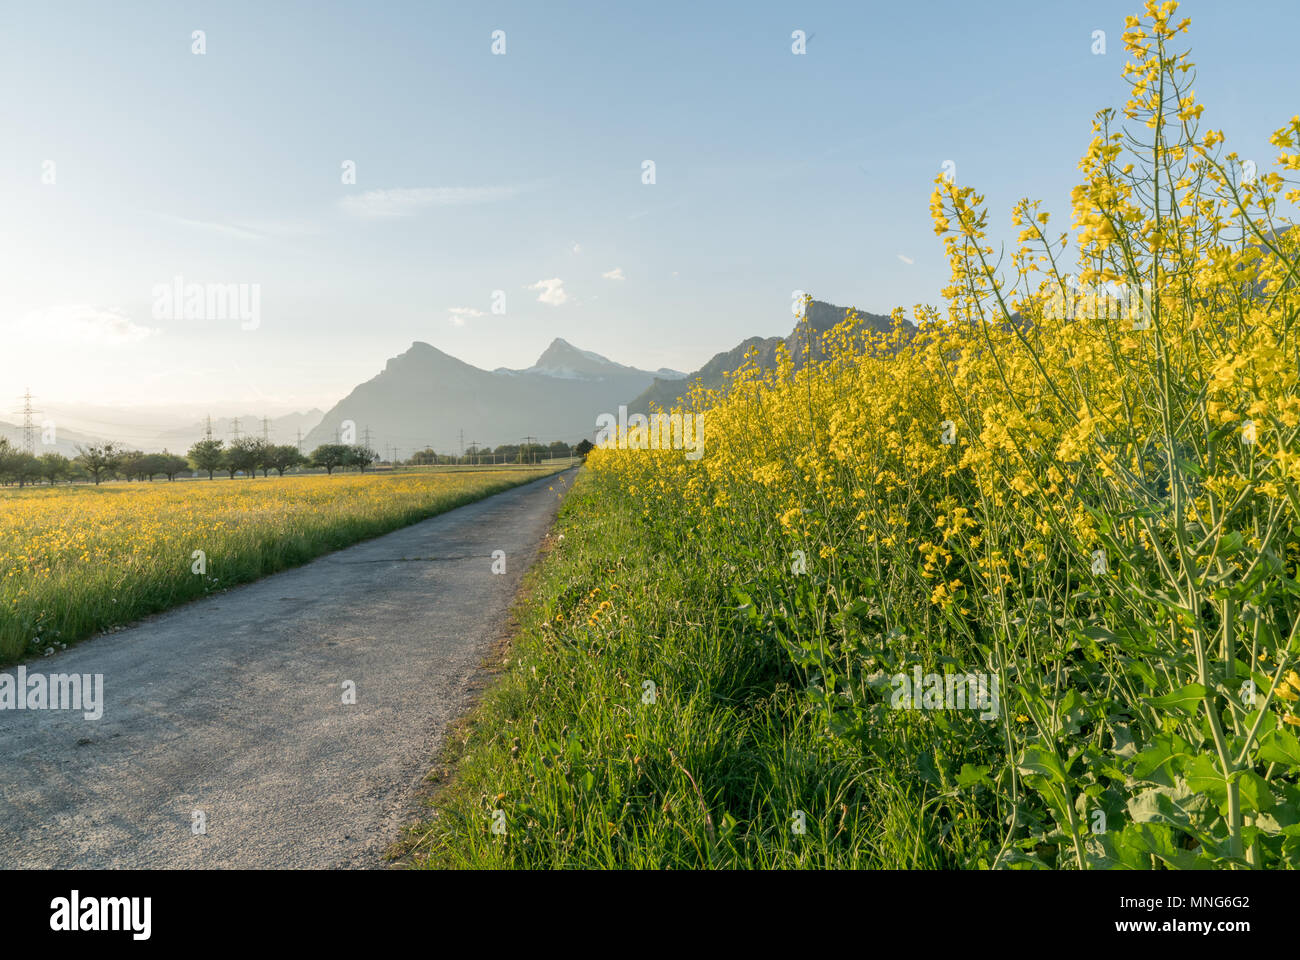 gravel road parting a rapeseed canola field and a yellow wildflower meadow with the setting sun disappearing behind a beautiful mountain landscape Stock Photo